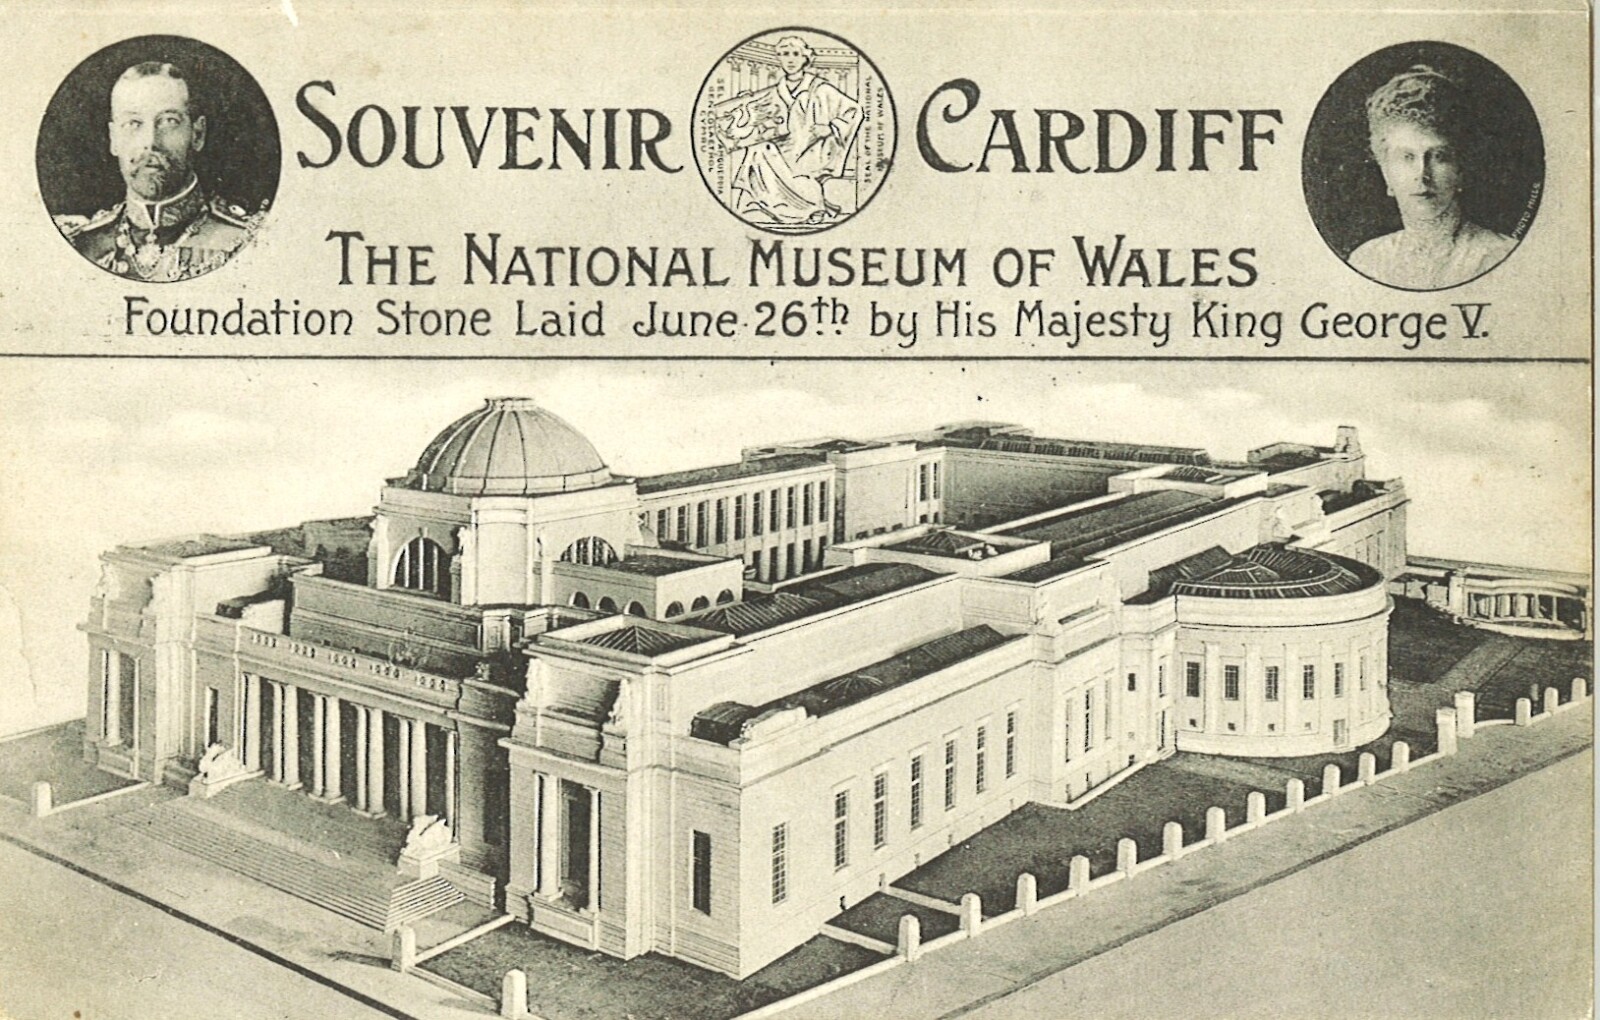 Images of the original model were used to illustrate various postcards, including this one commemorating the Laying of the Foundation Stone in 1912